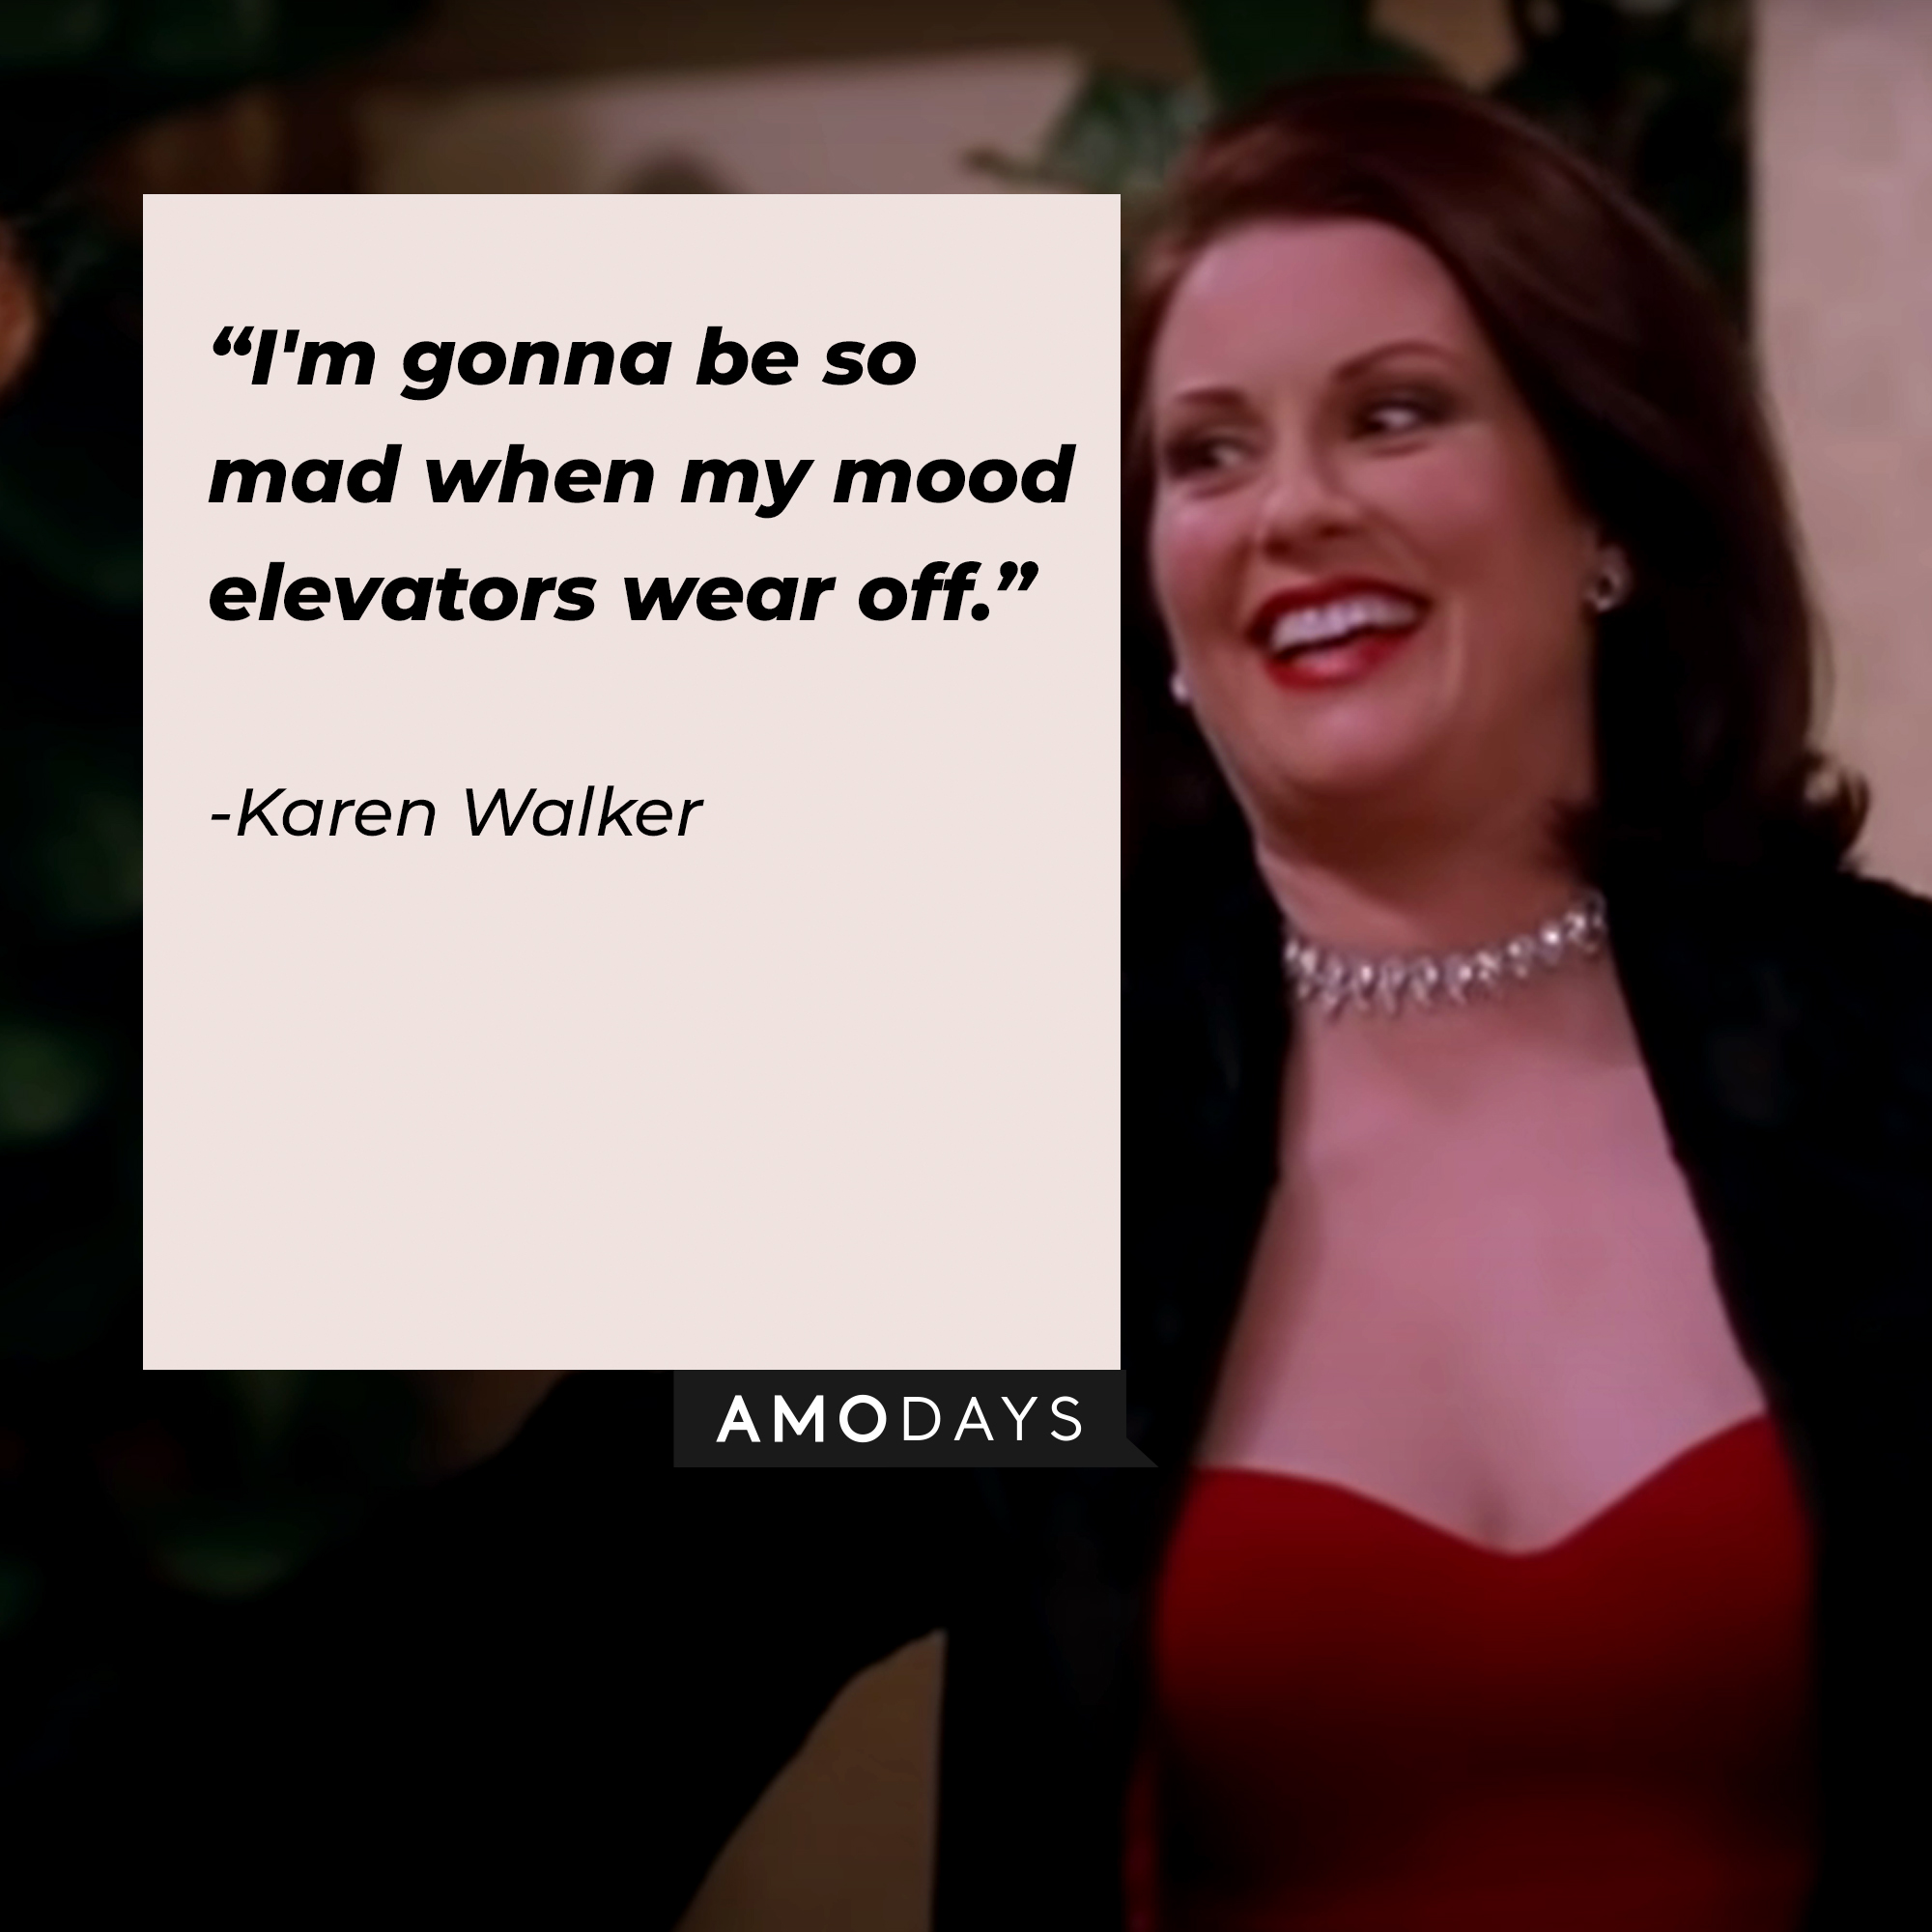 A photo of Karen Walker with the quote, "I'm gonna be so mad when my mood elevators wear off." | Source: YouTube/ComedyBites